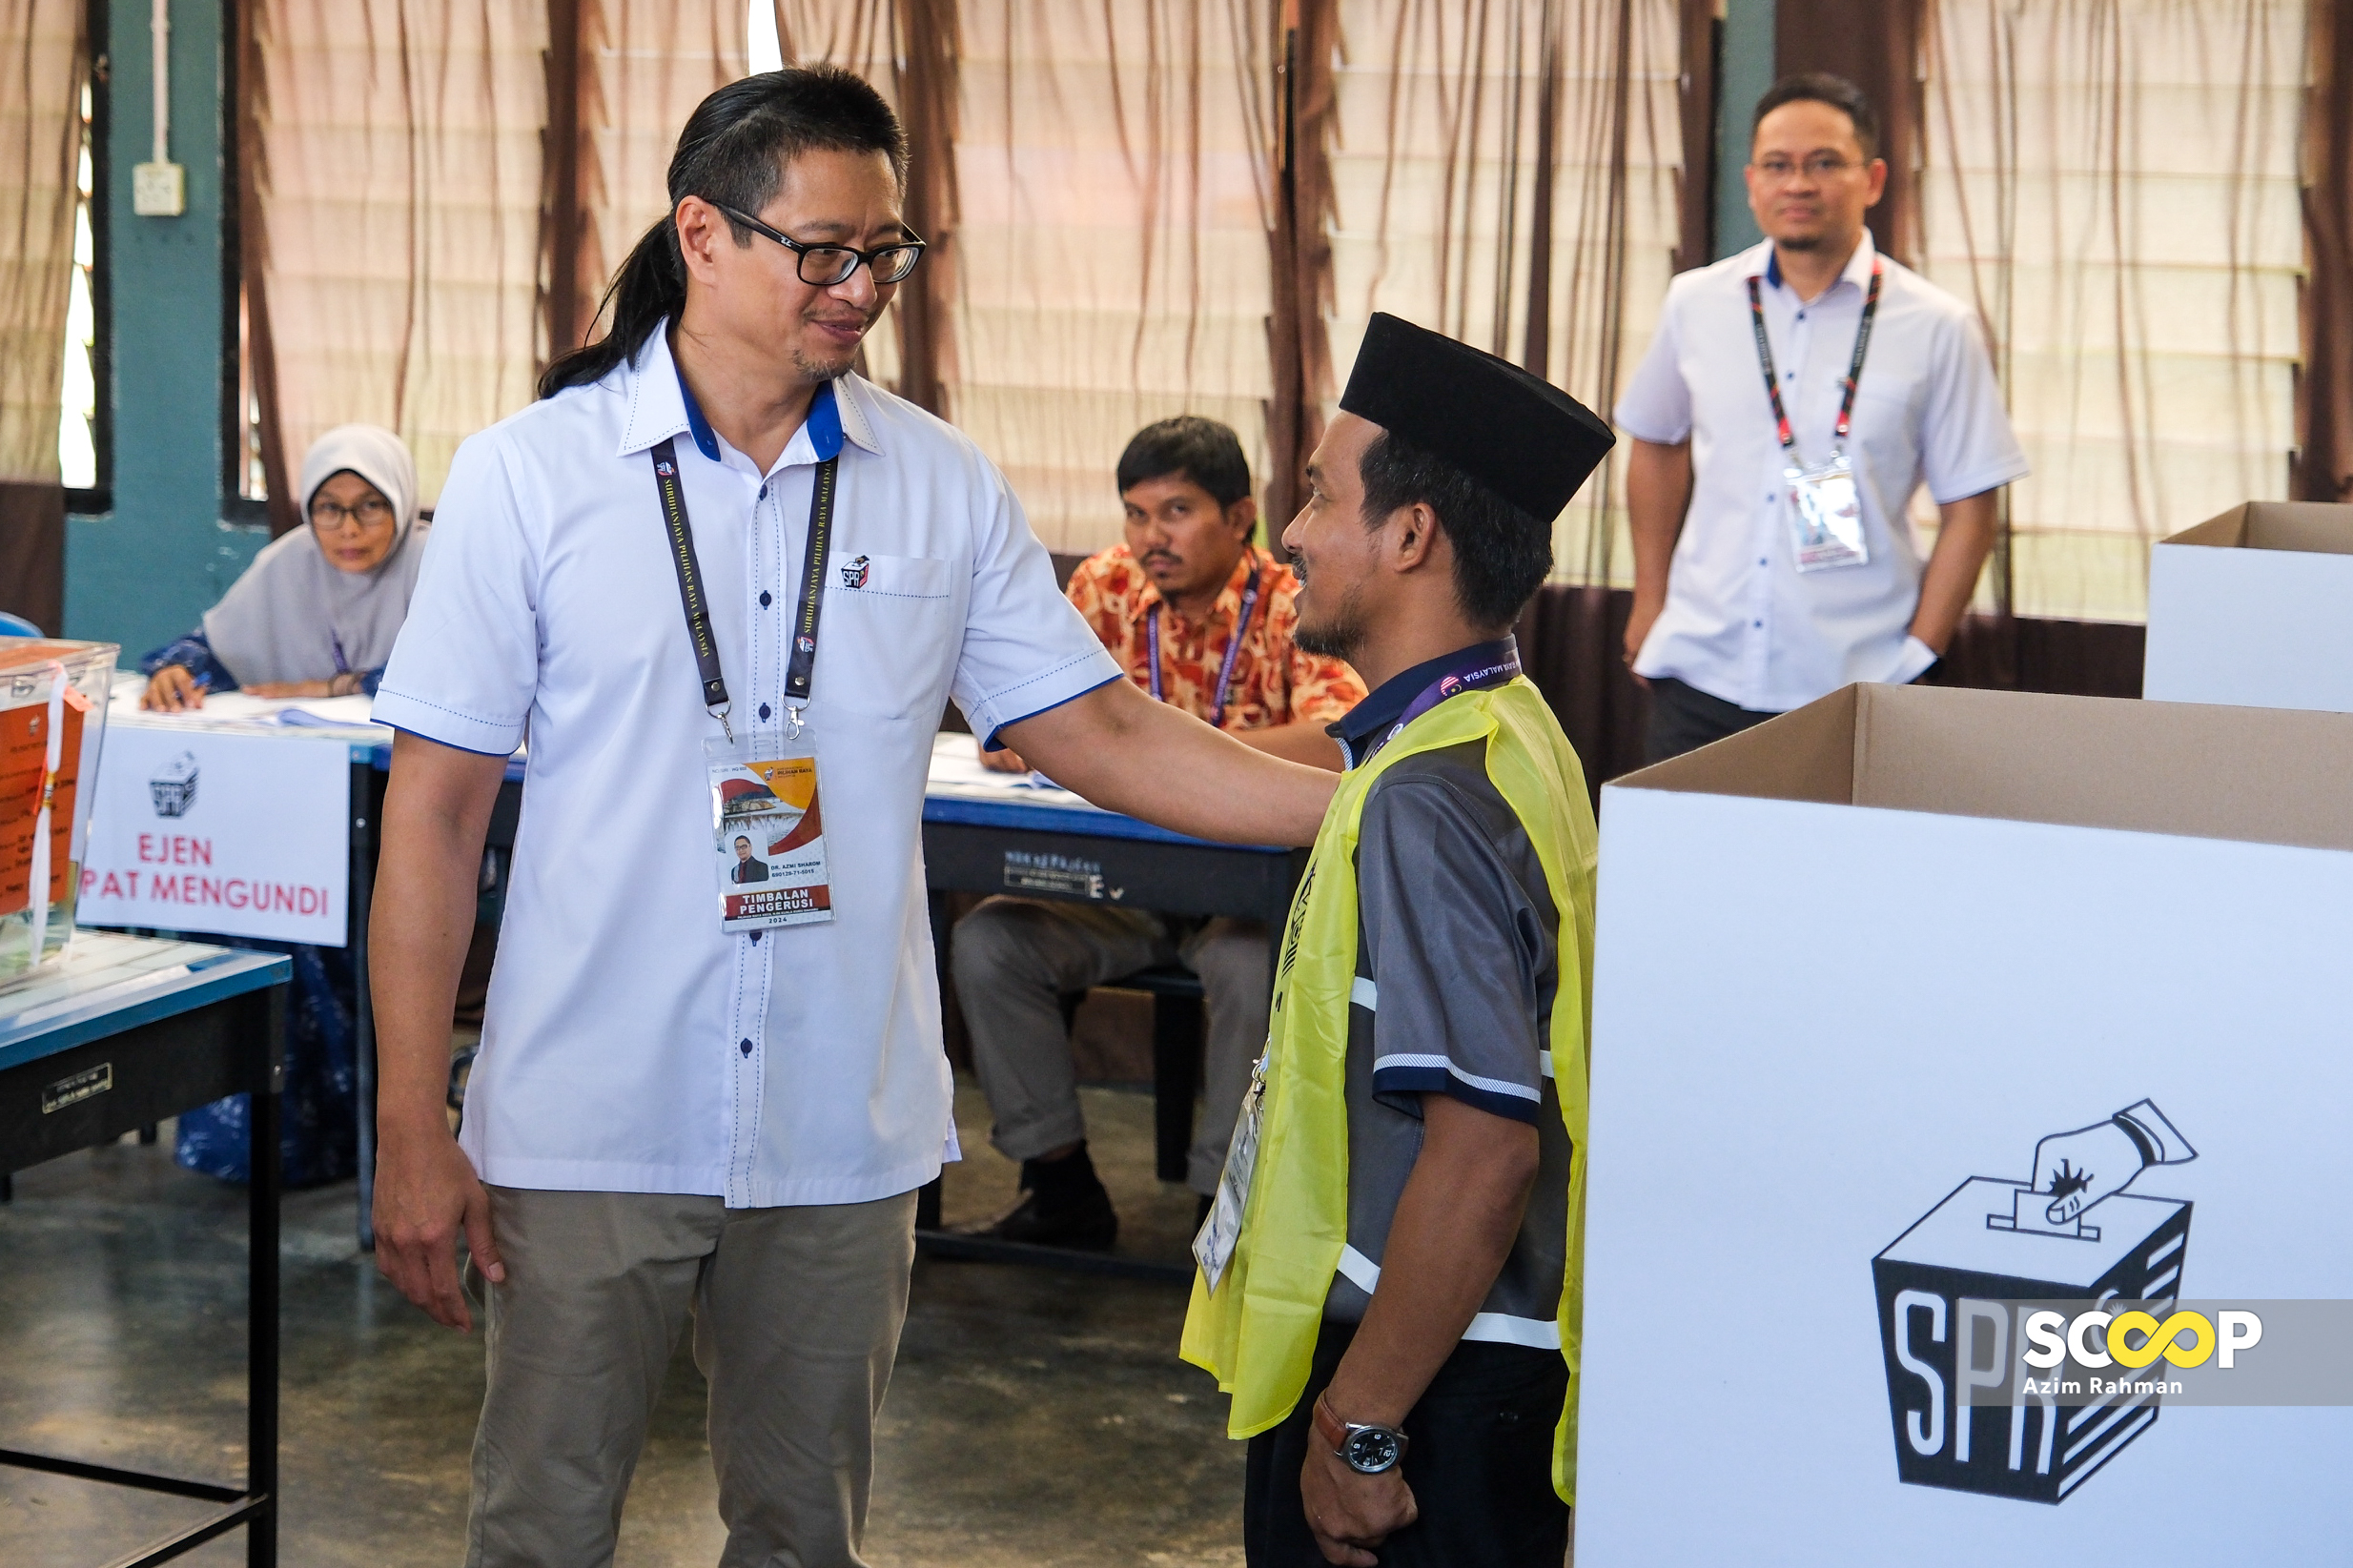 Kuala Kubu Baharu poll results expected at 9pm, earlier than planned: EC deputy chief